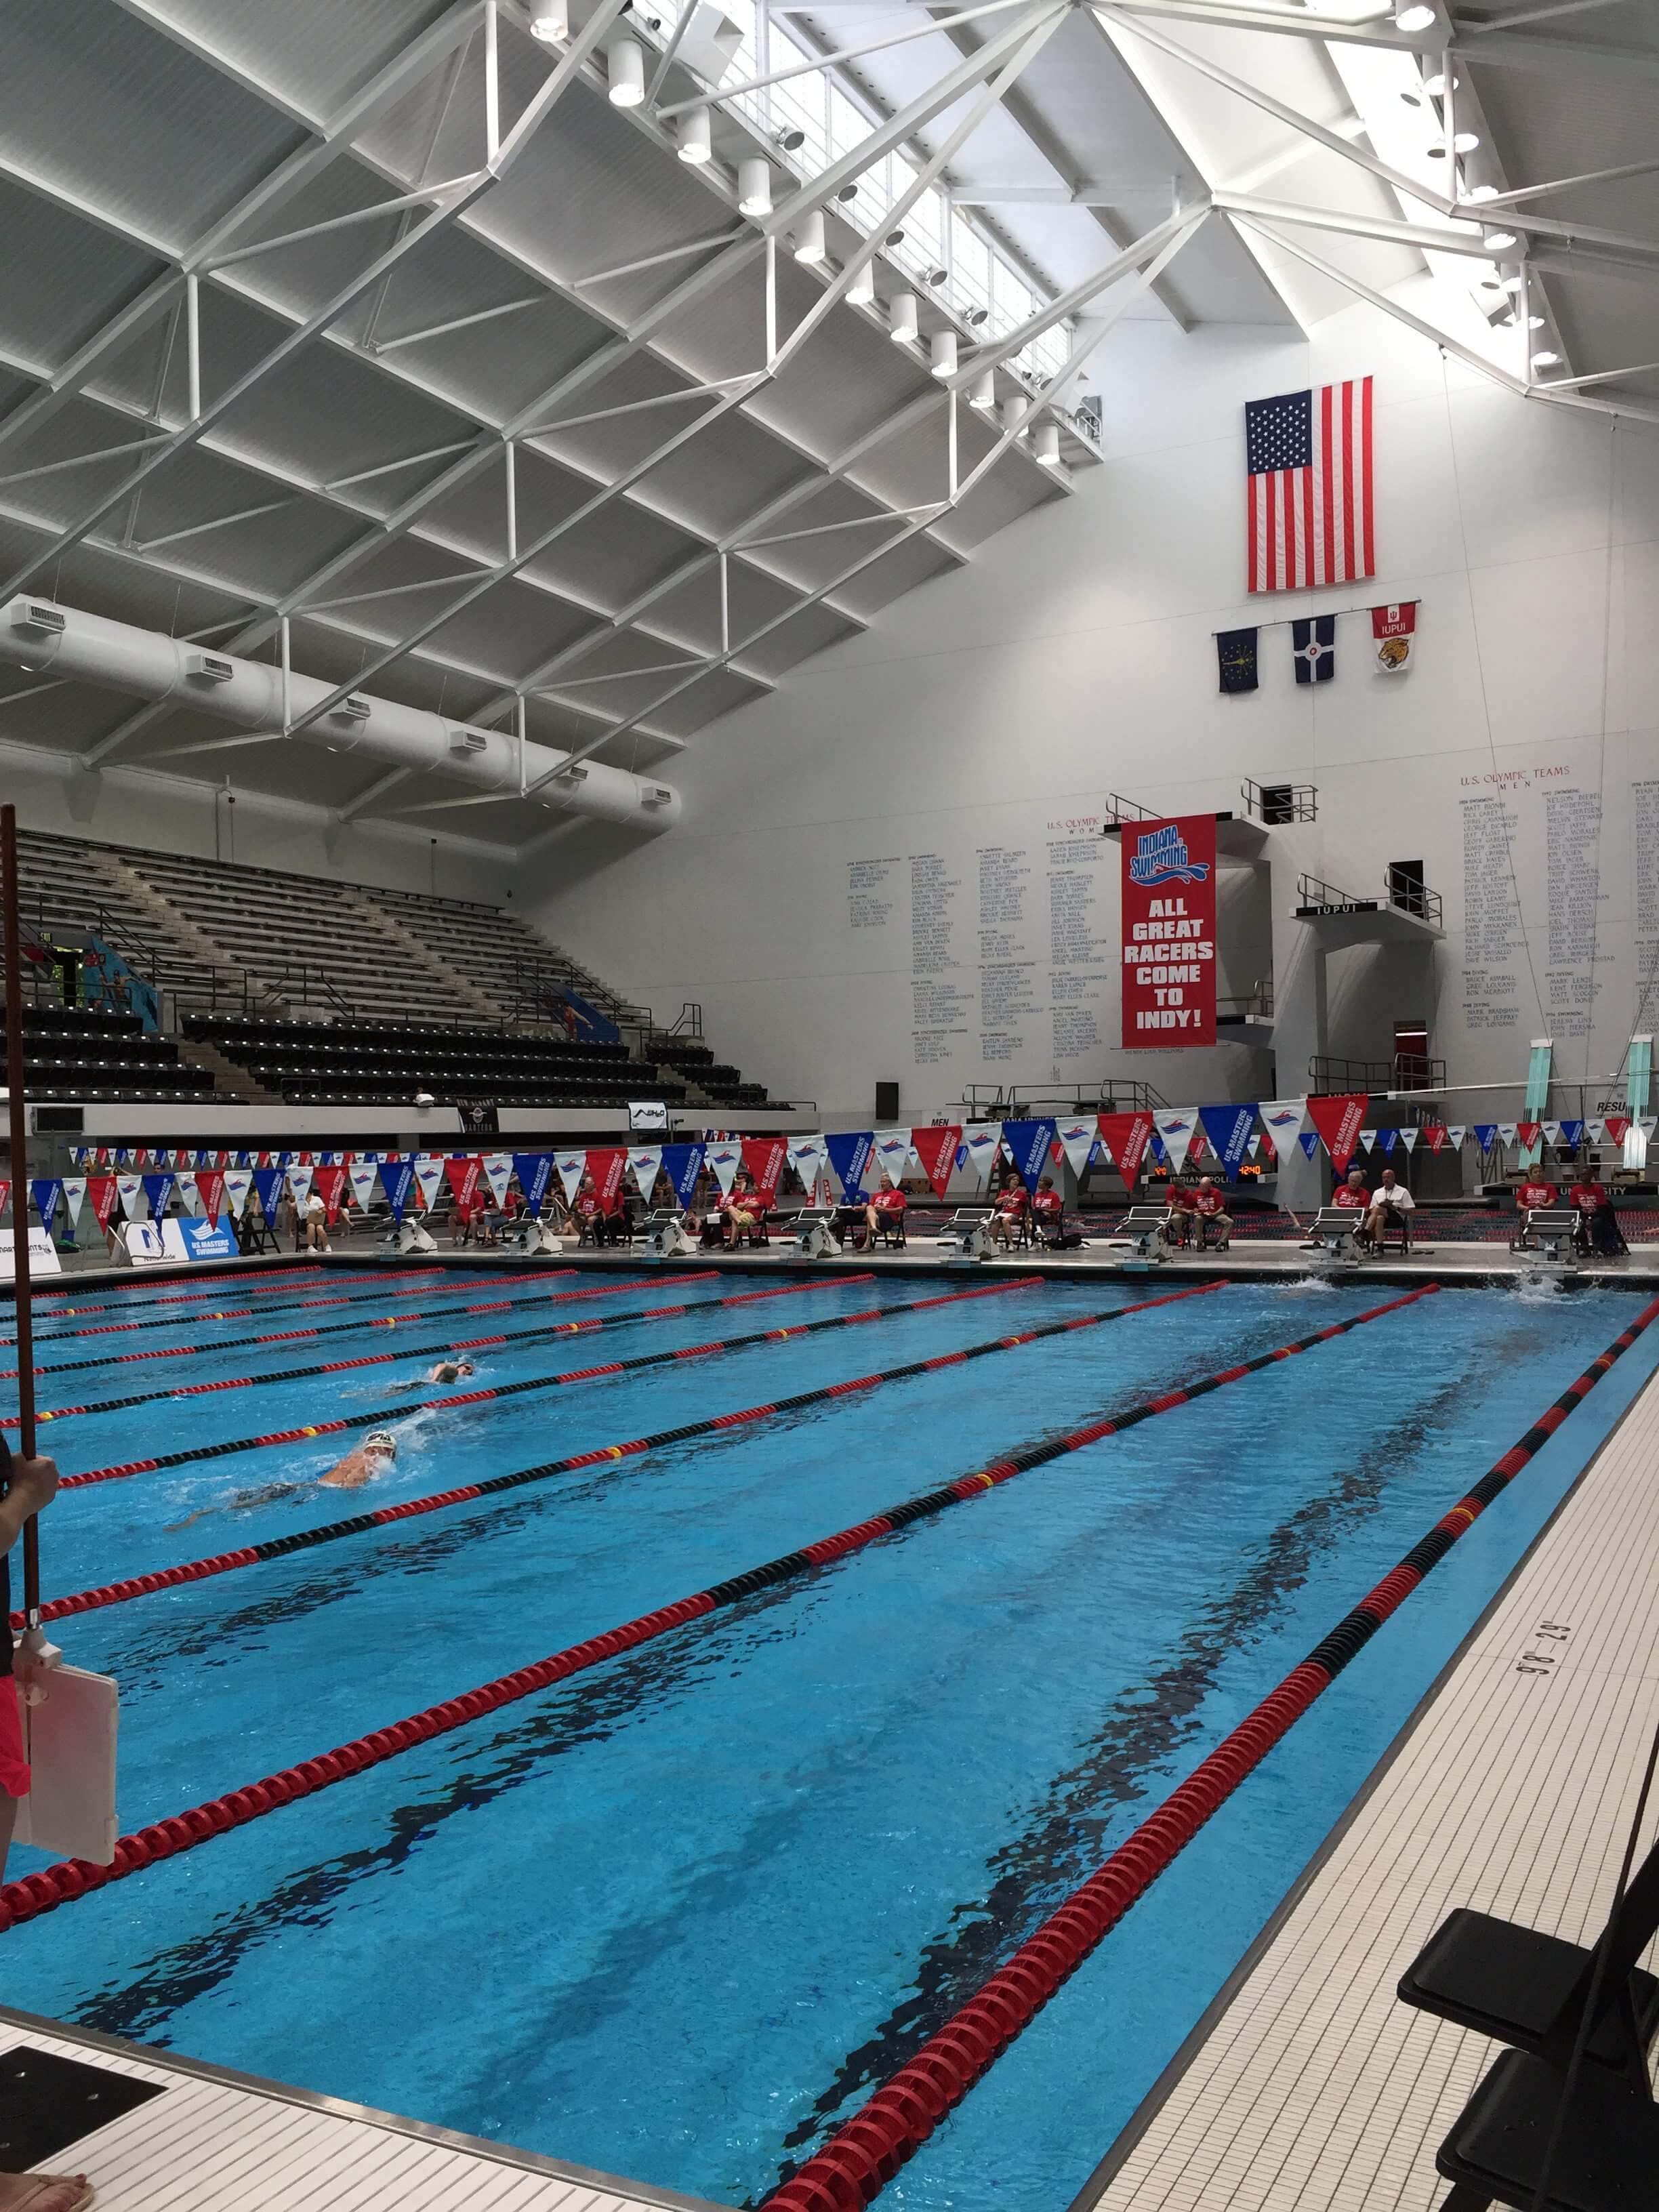 21 USMS Records Fall On Second Day Of Masters Nationals